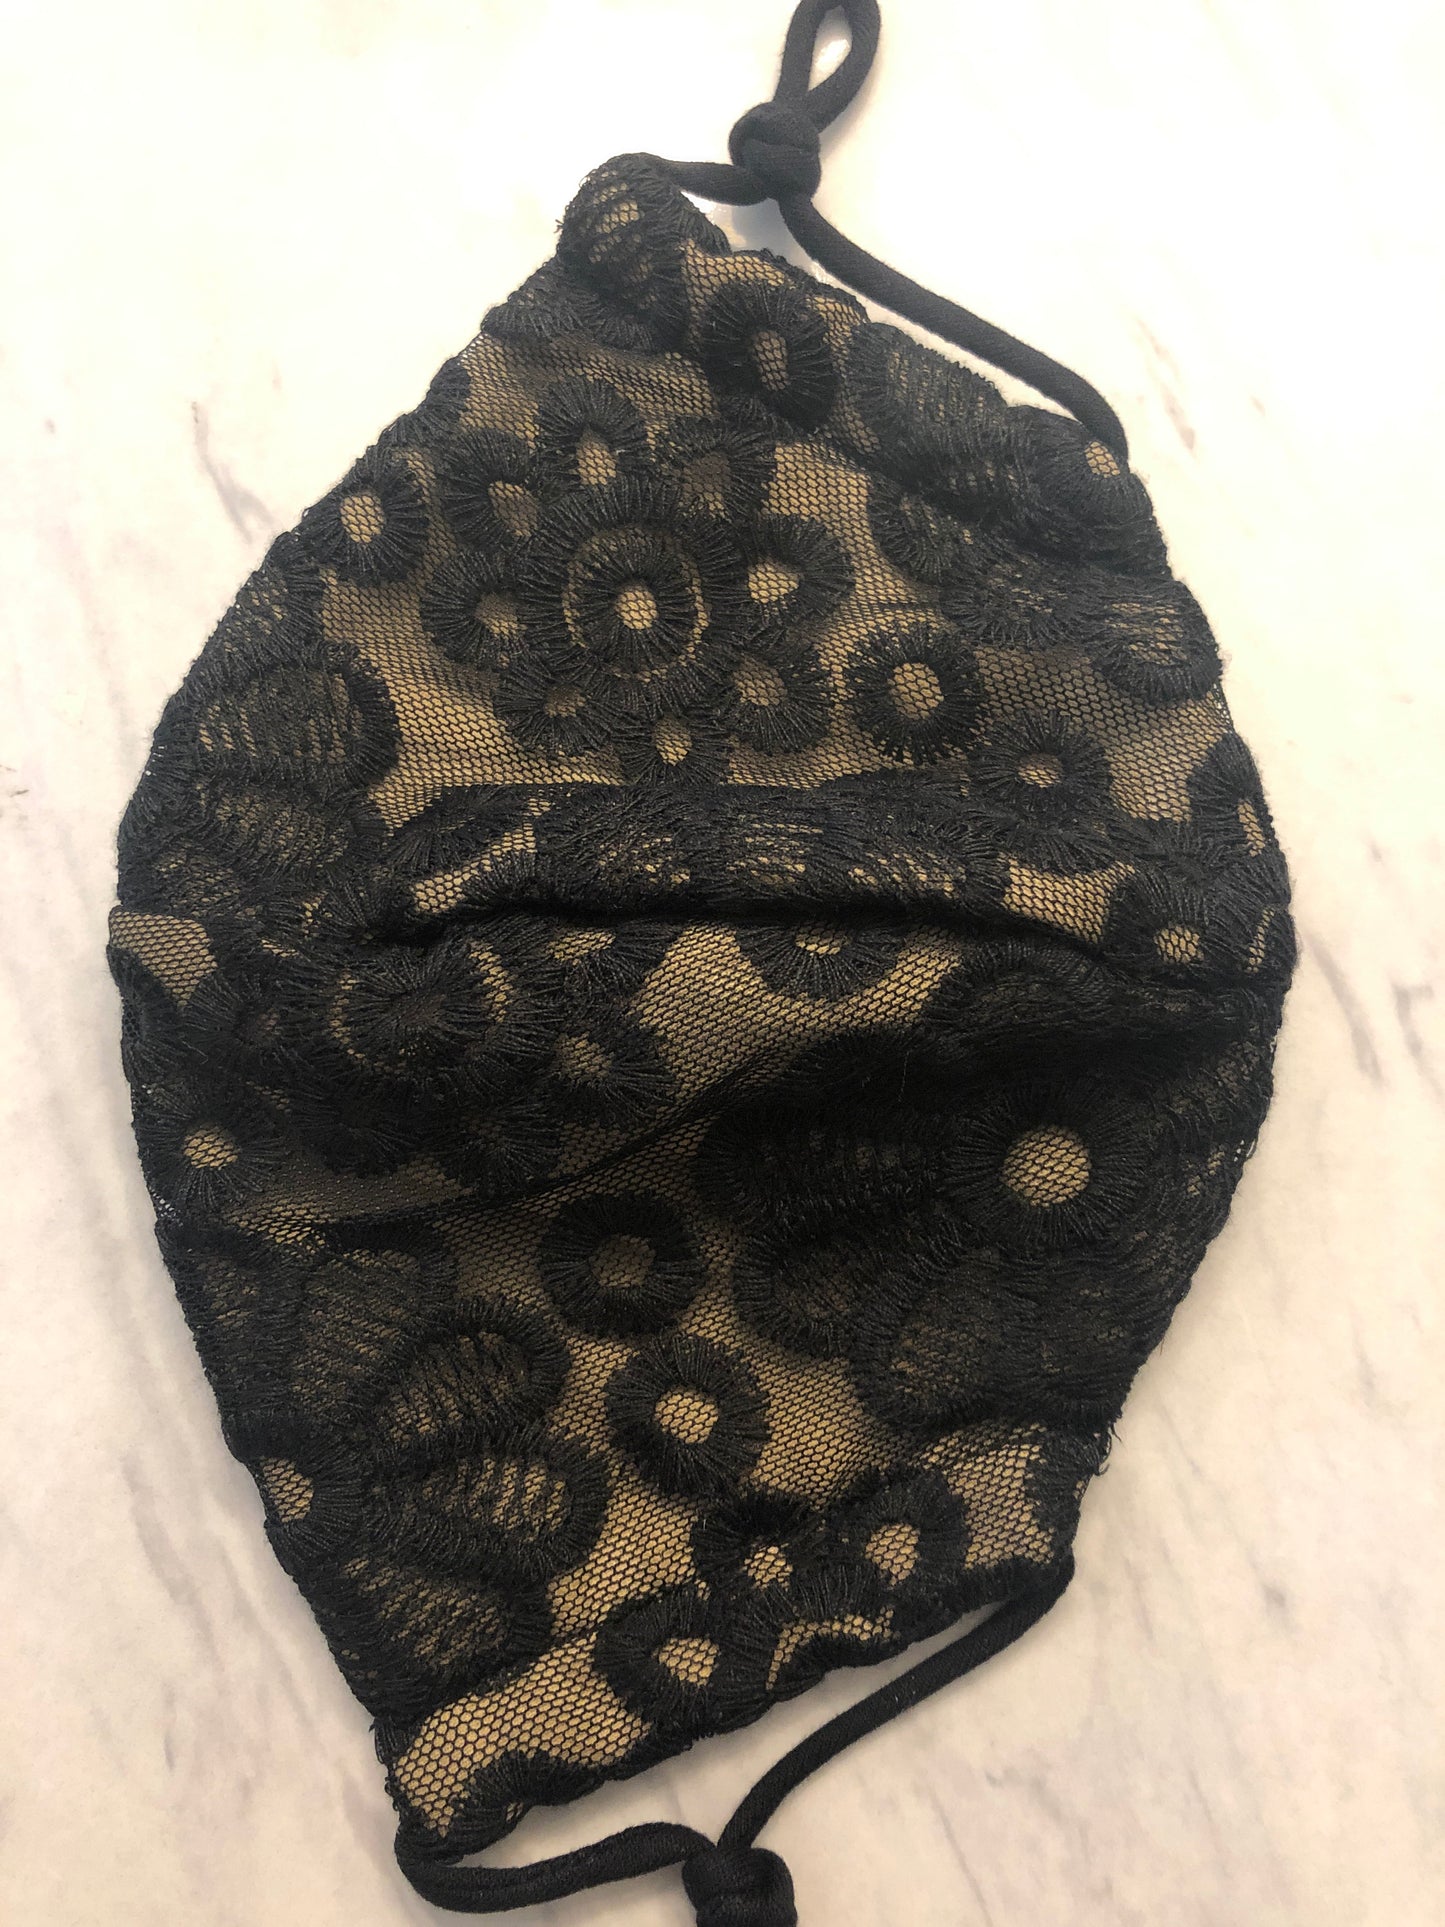 Nude and Black Lace Adjustable Mask